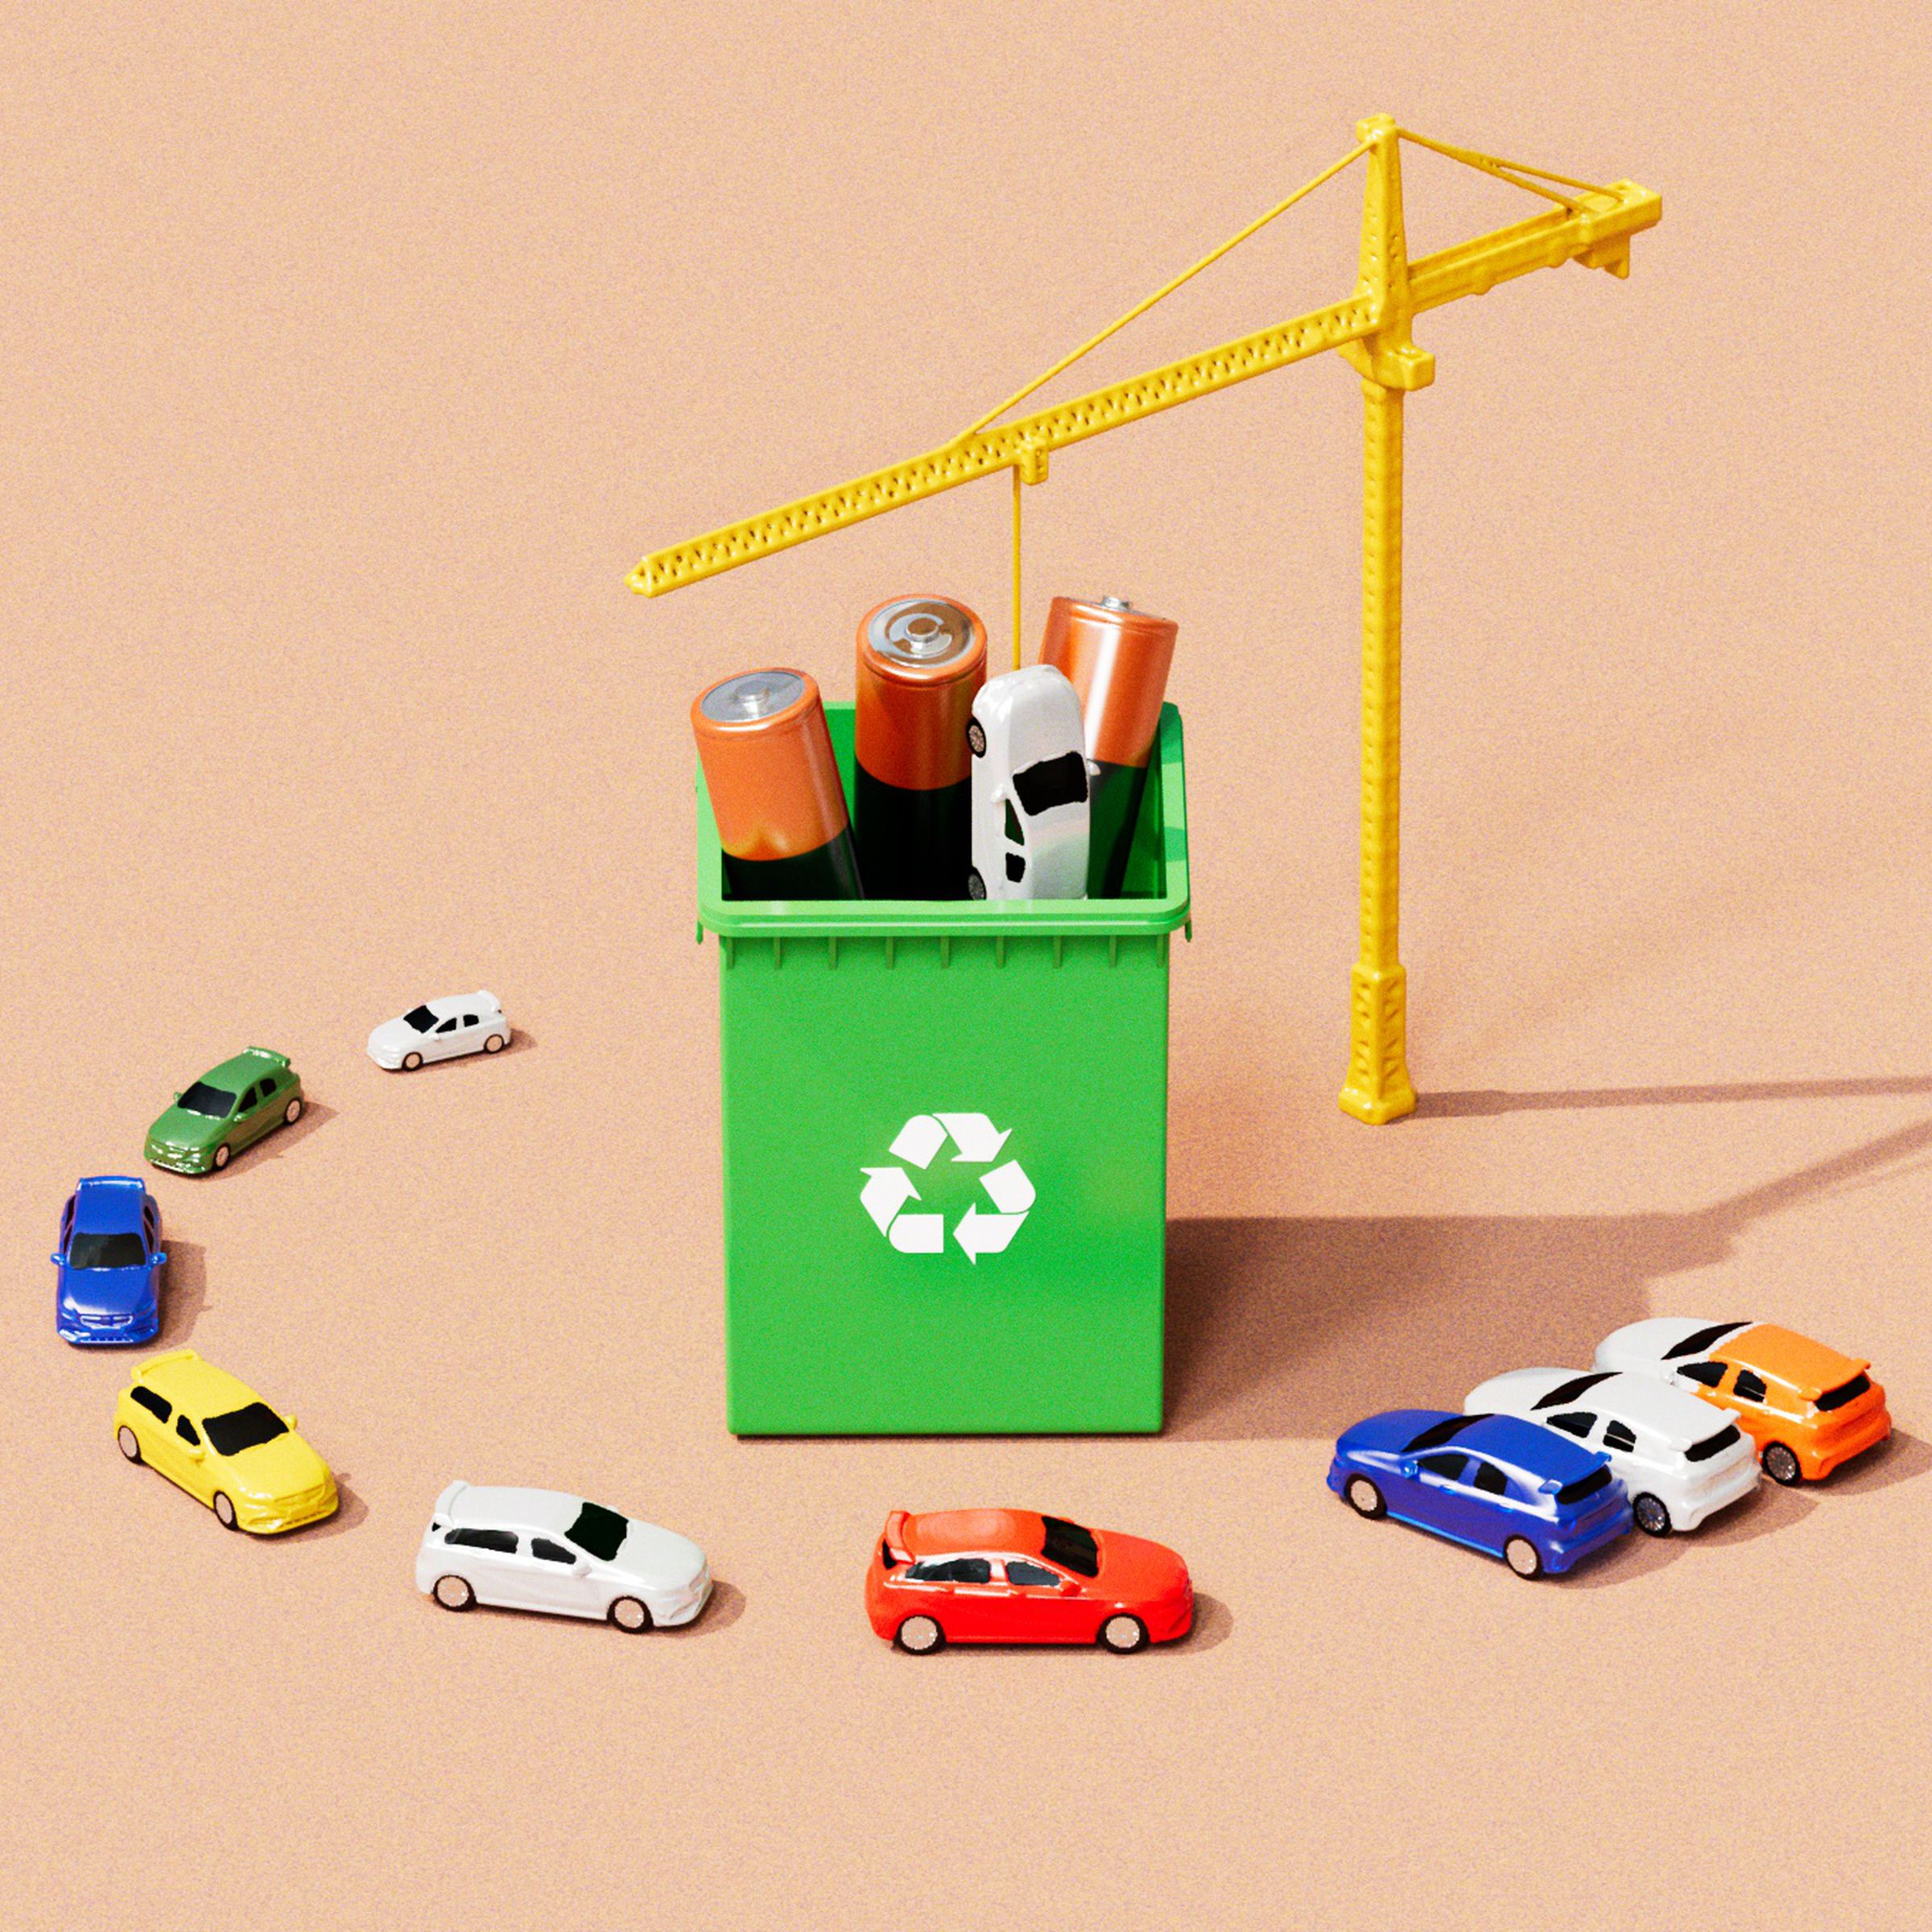 3D illustration showing an electric vehicle battery being recycled.